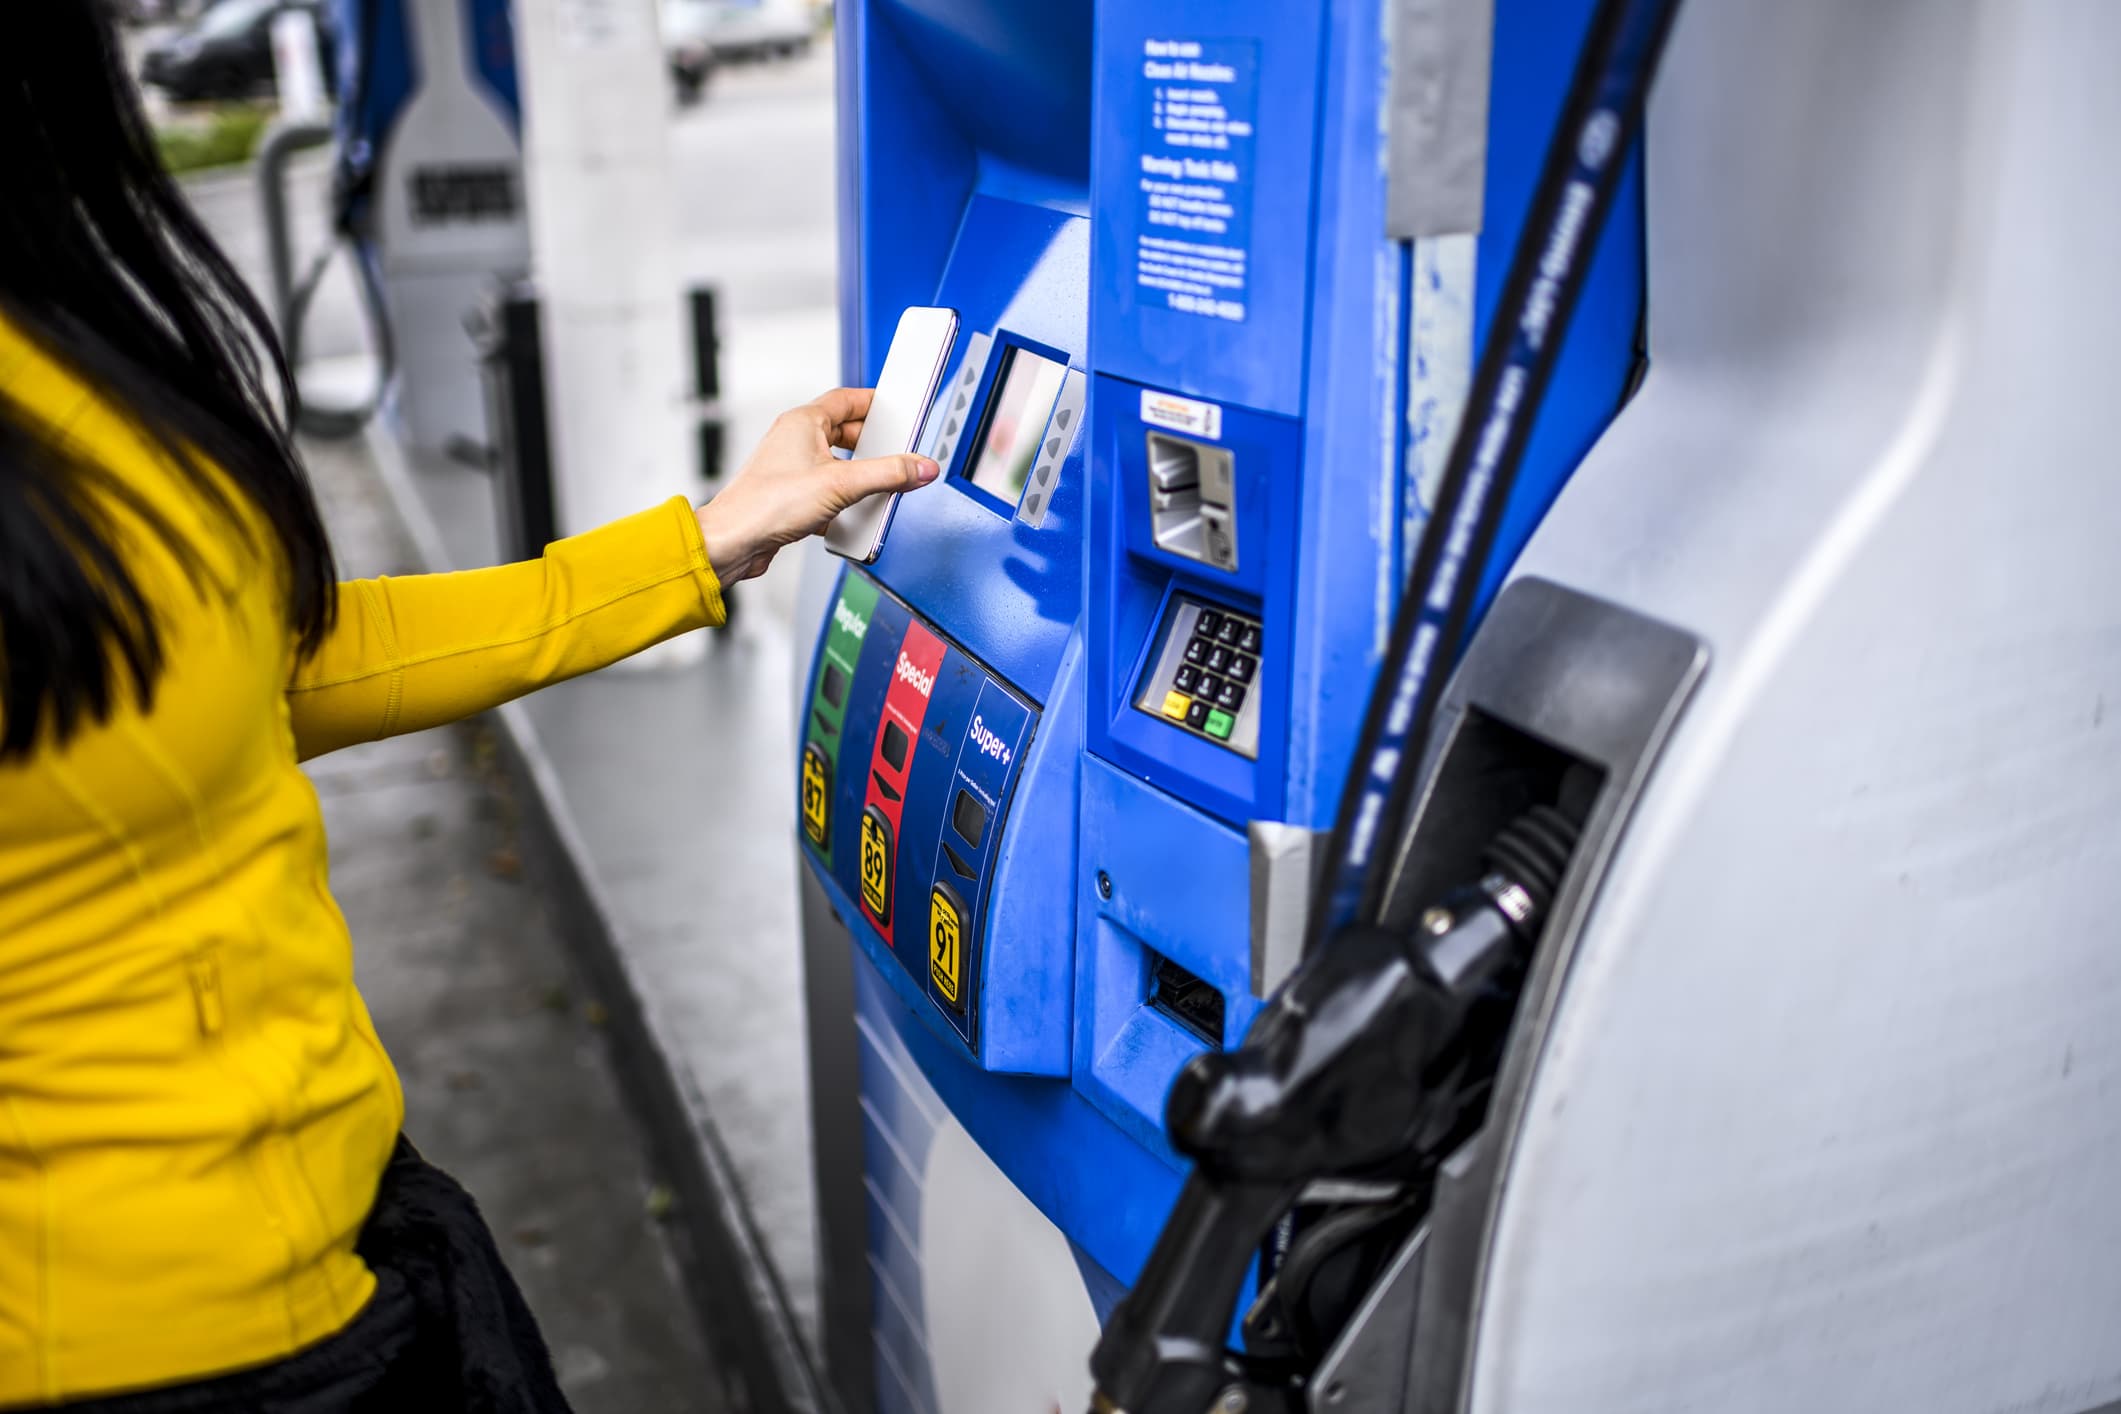 Can You Use Apple Pay at Gas Stations?